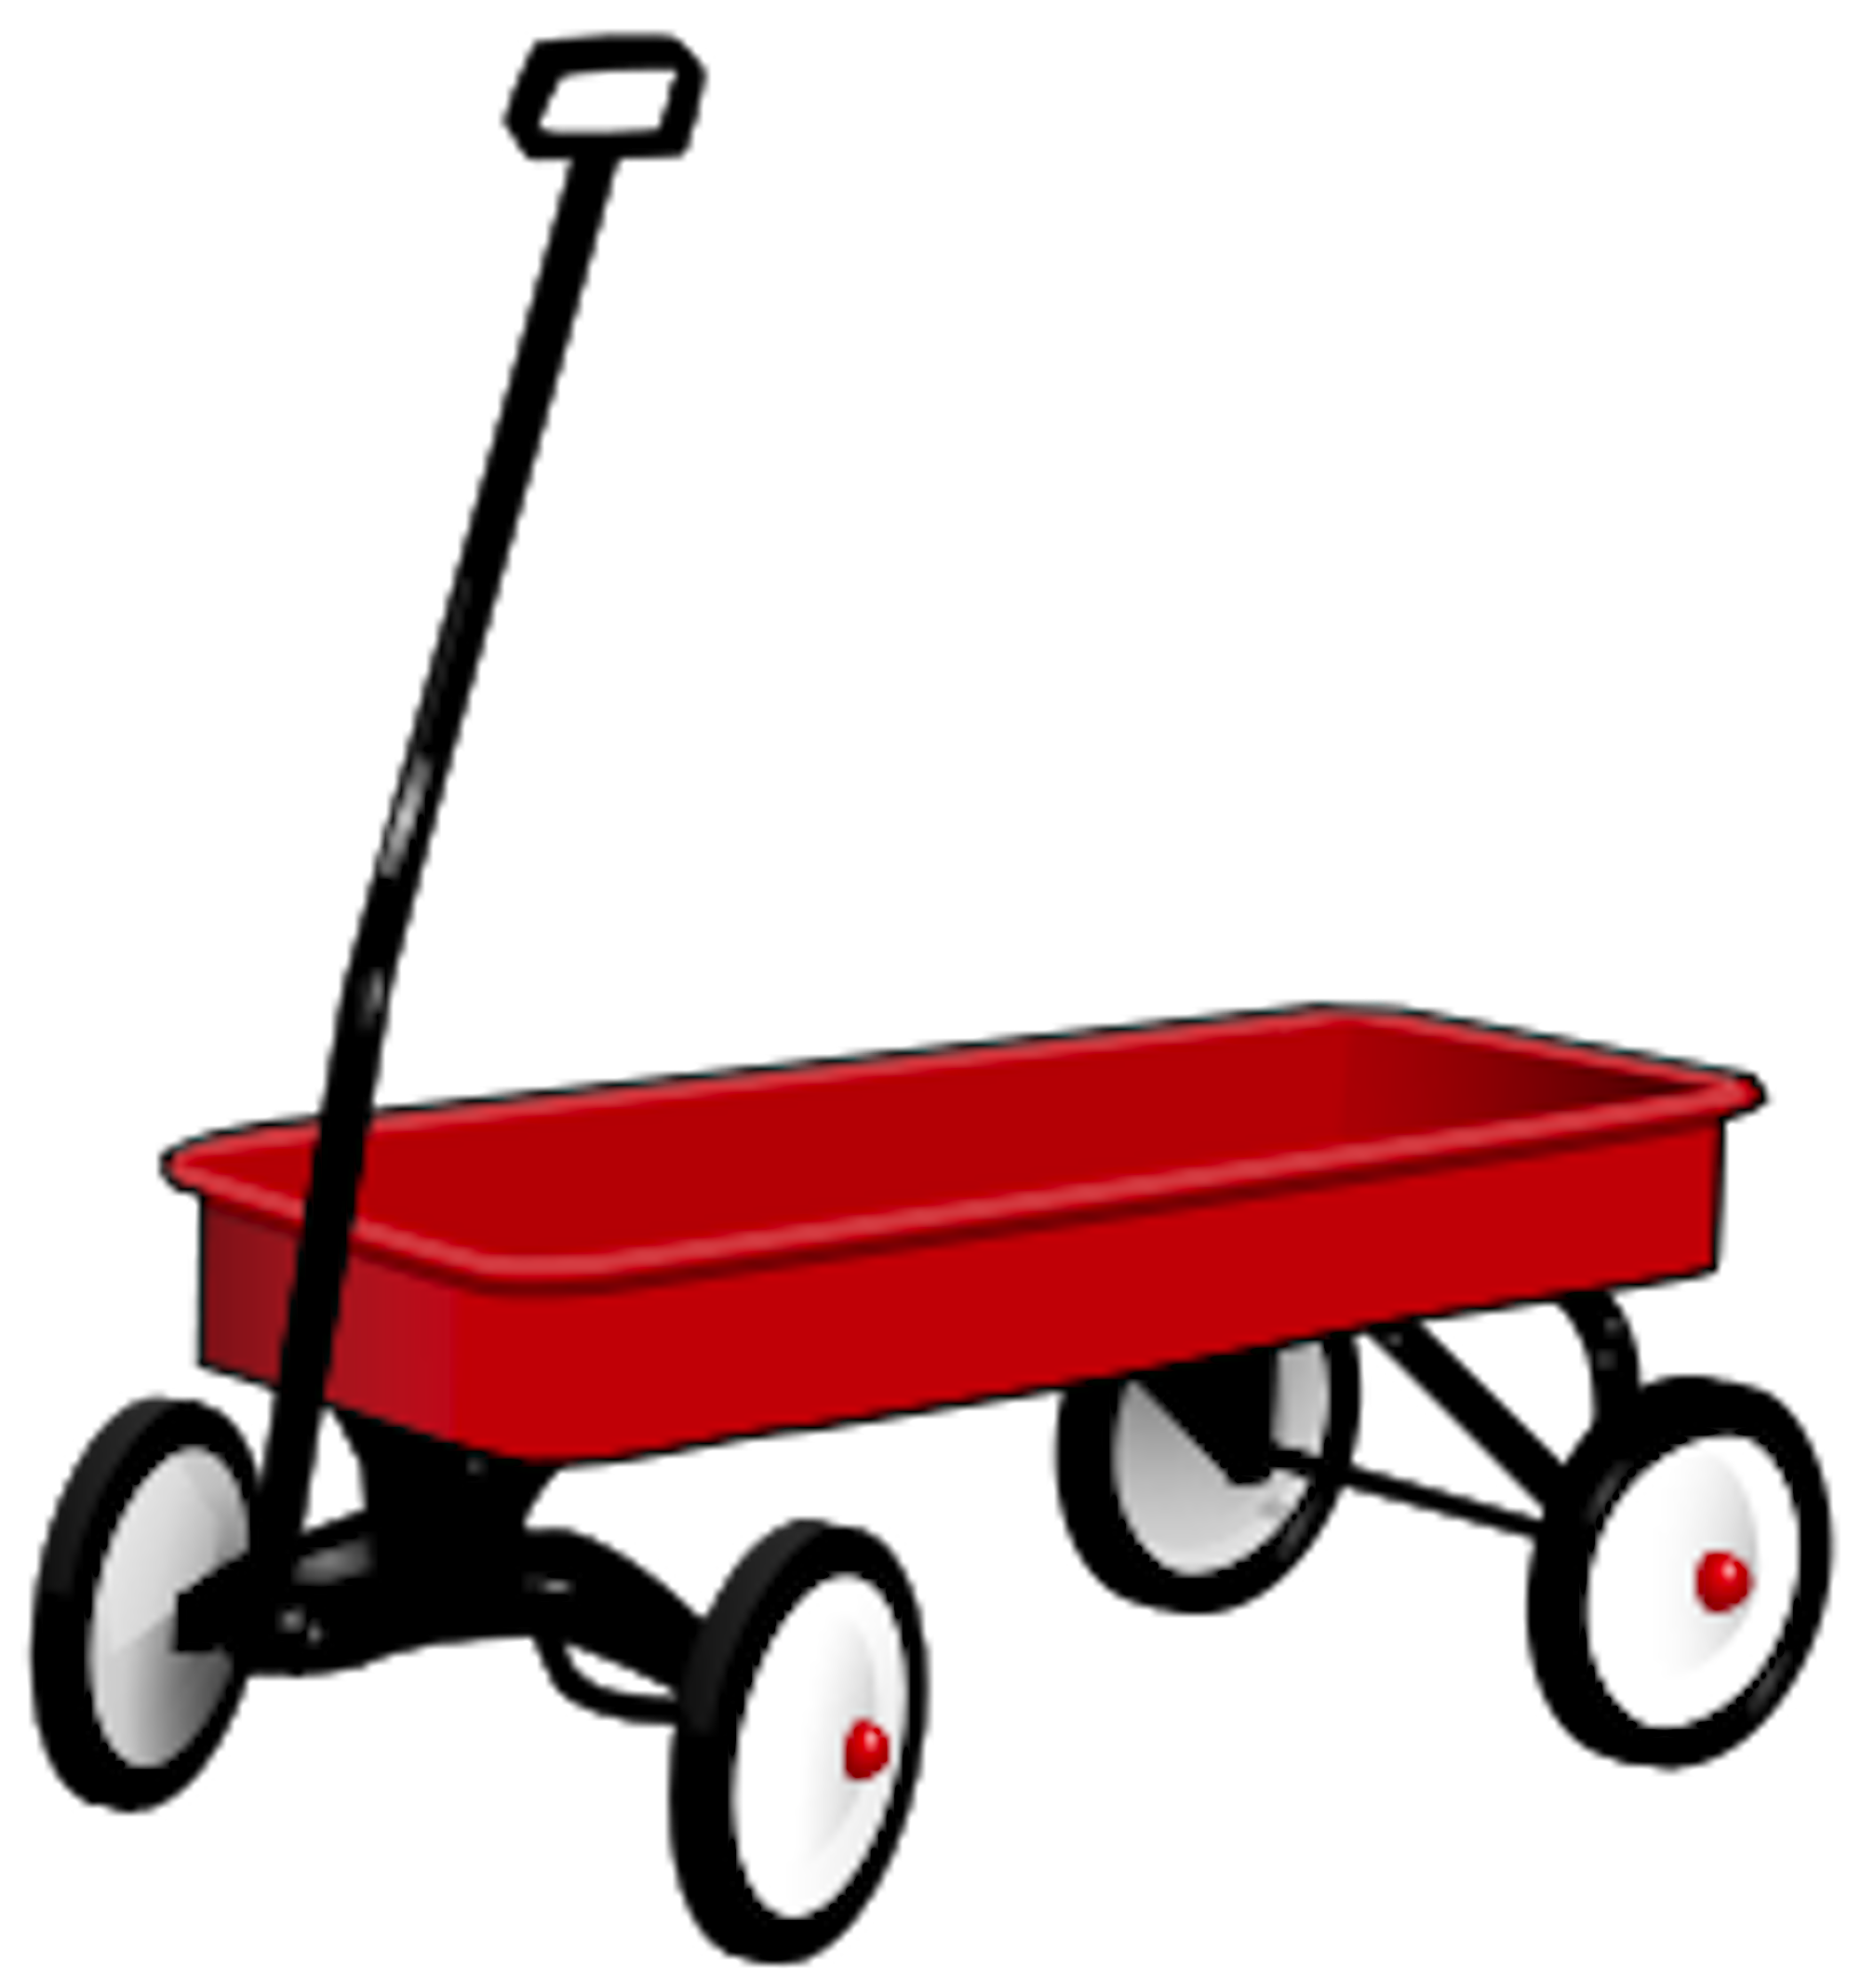 Red Wagon Pictures - ClipArt Best